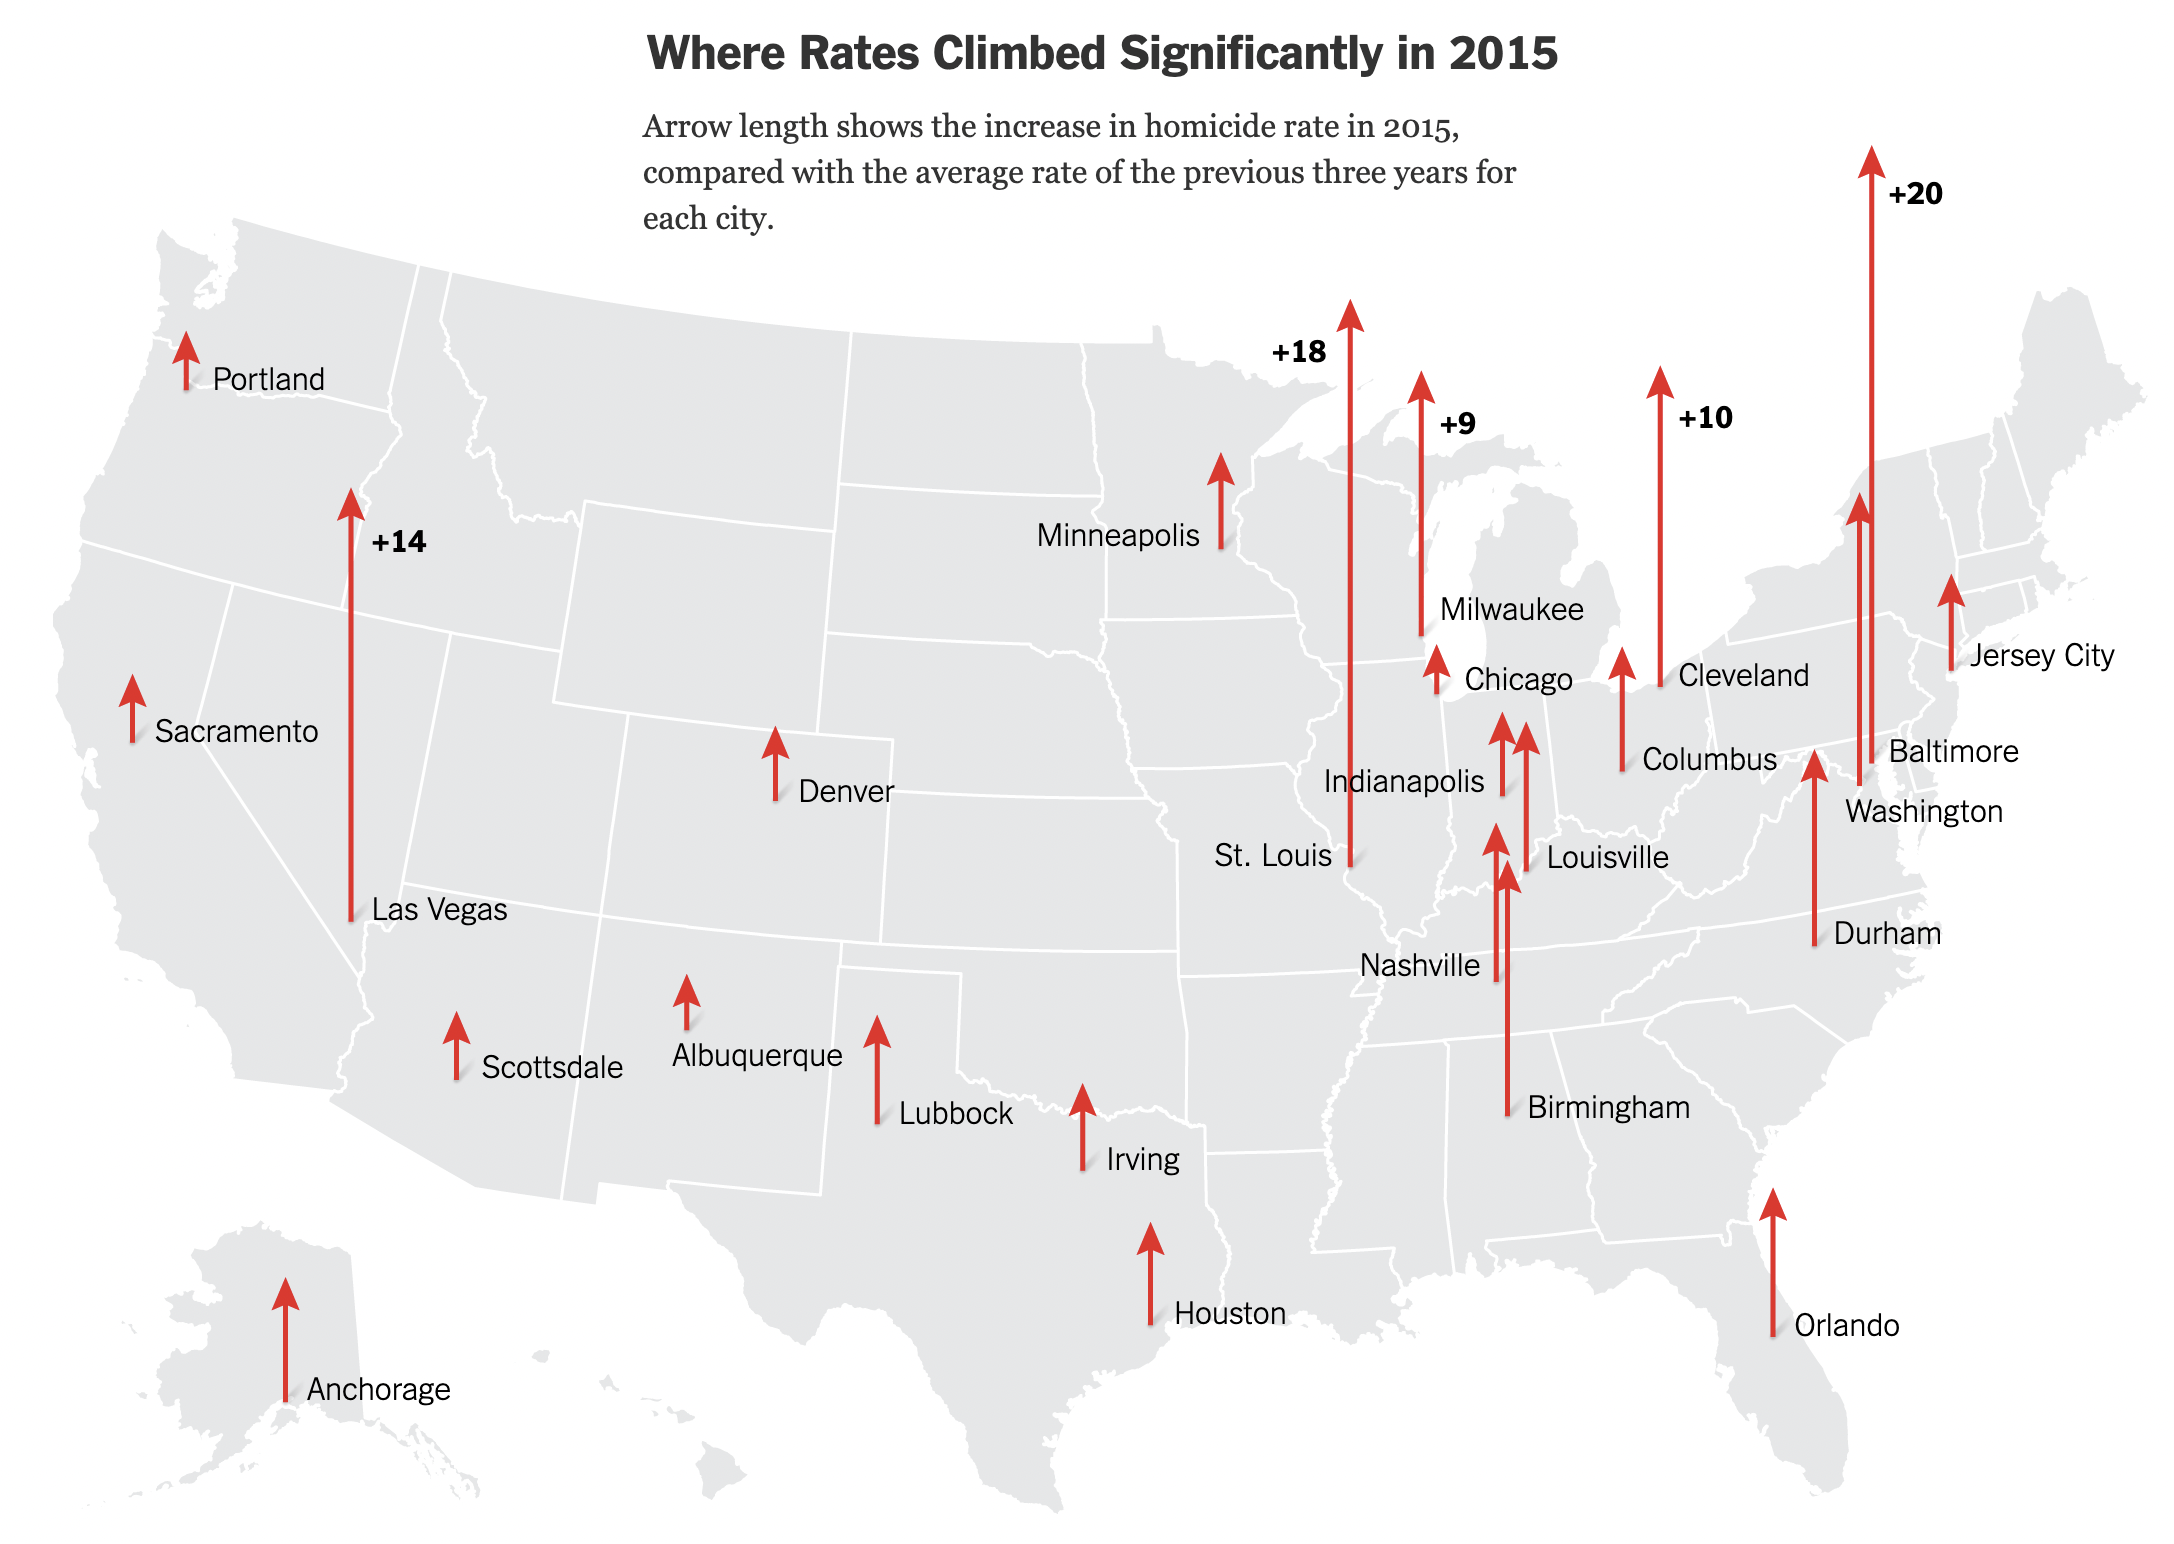 A map of the US with arrows showing the increase in homicide rates in 2015